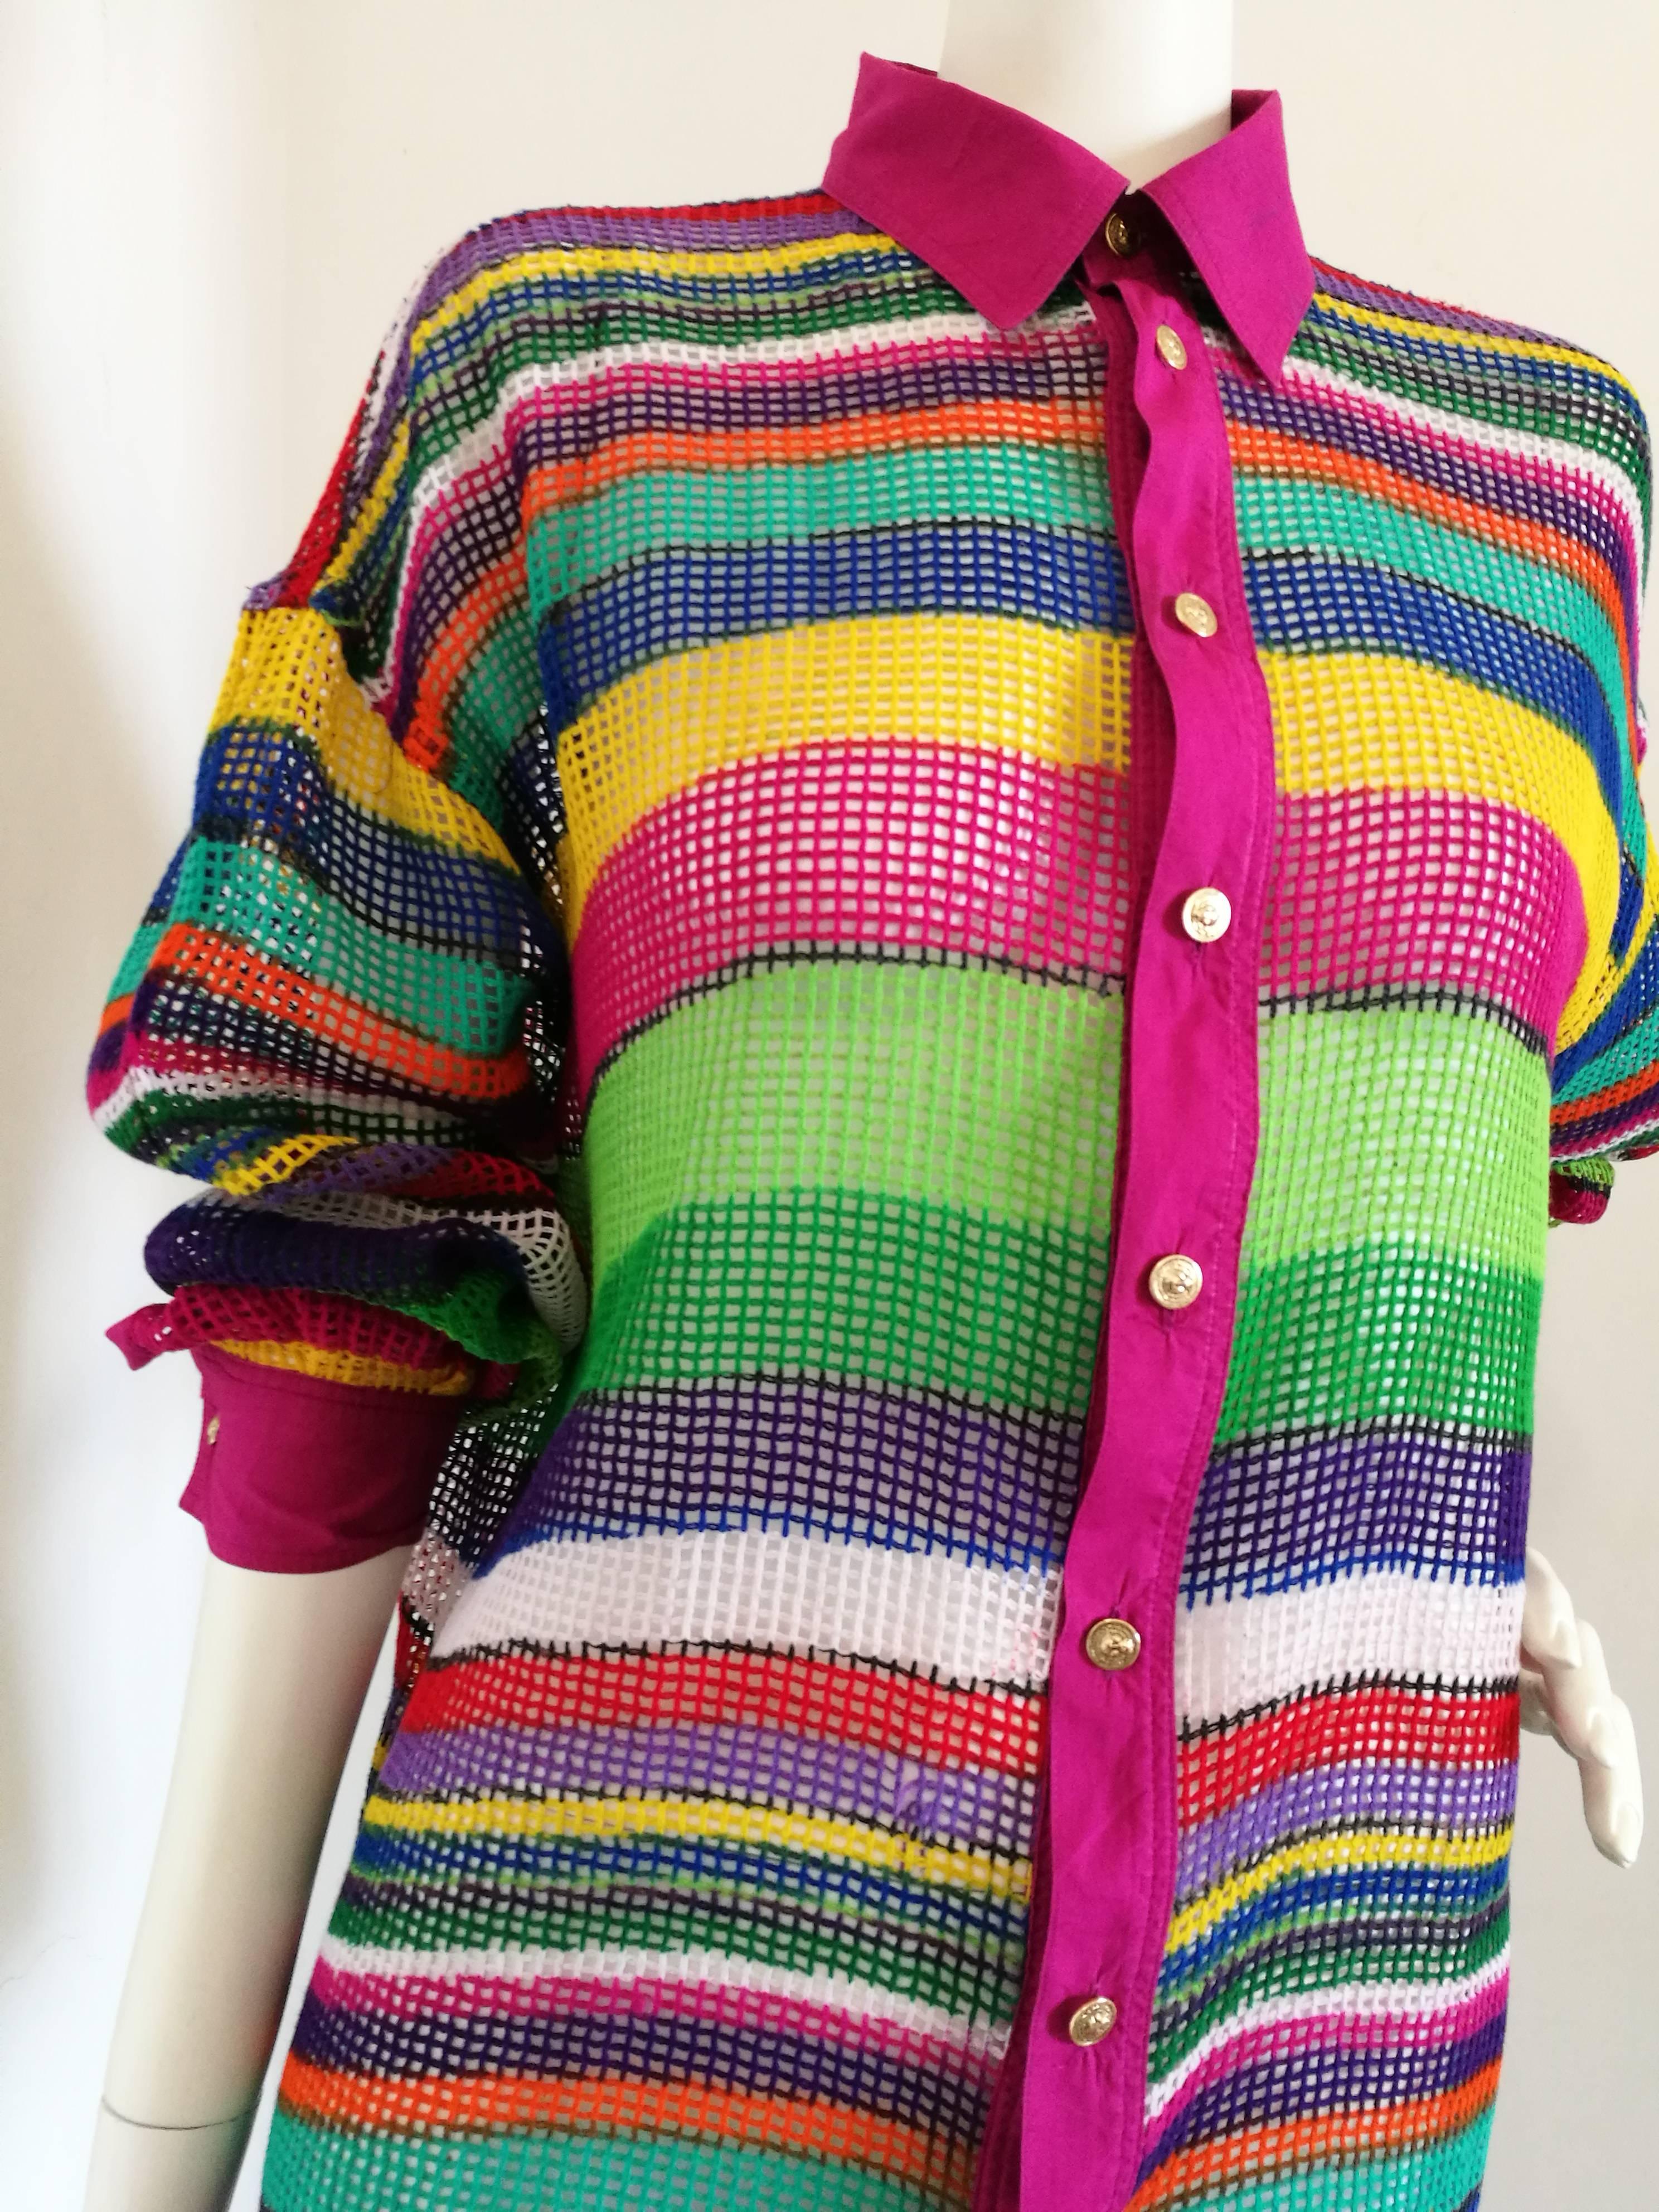 Versus by Gianni Versace multicolour see through Cardigan 
Totally made in italy in italian size range 46
Gold tone hardware bottons